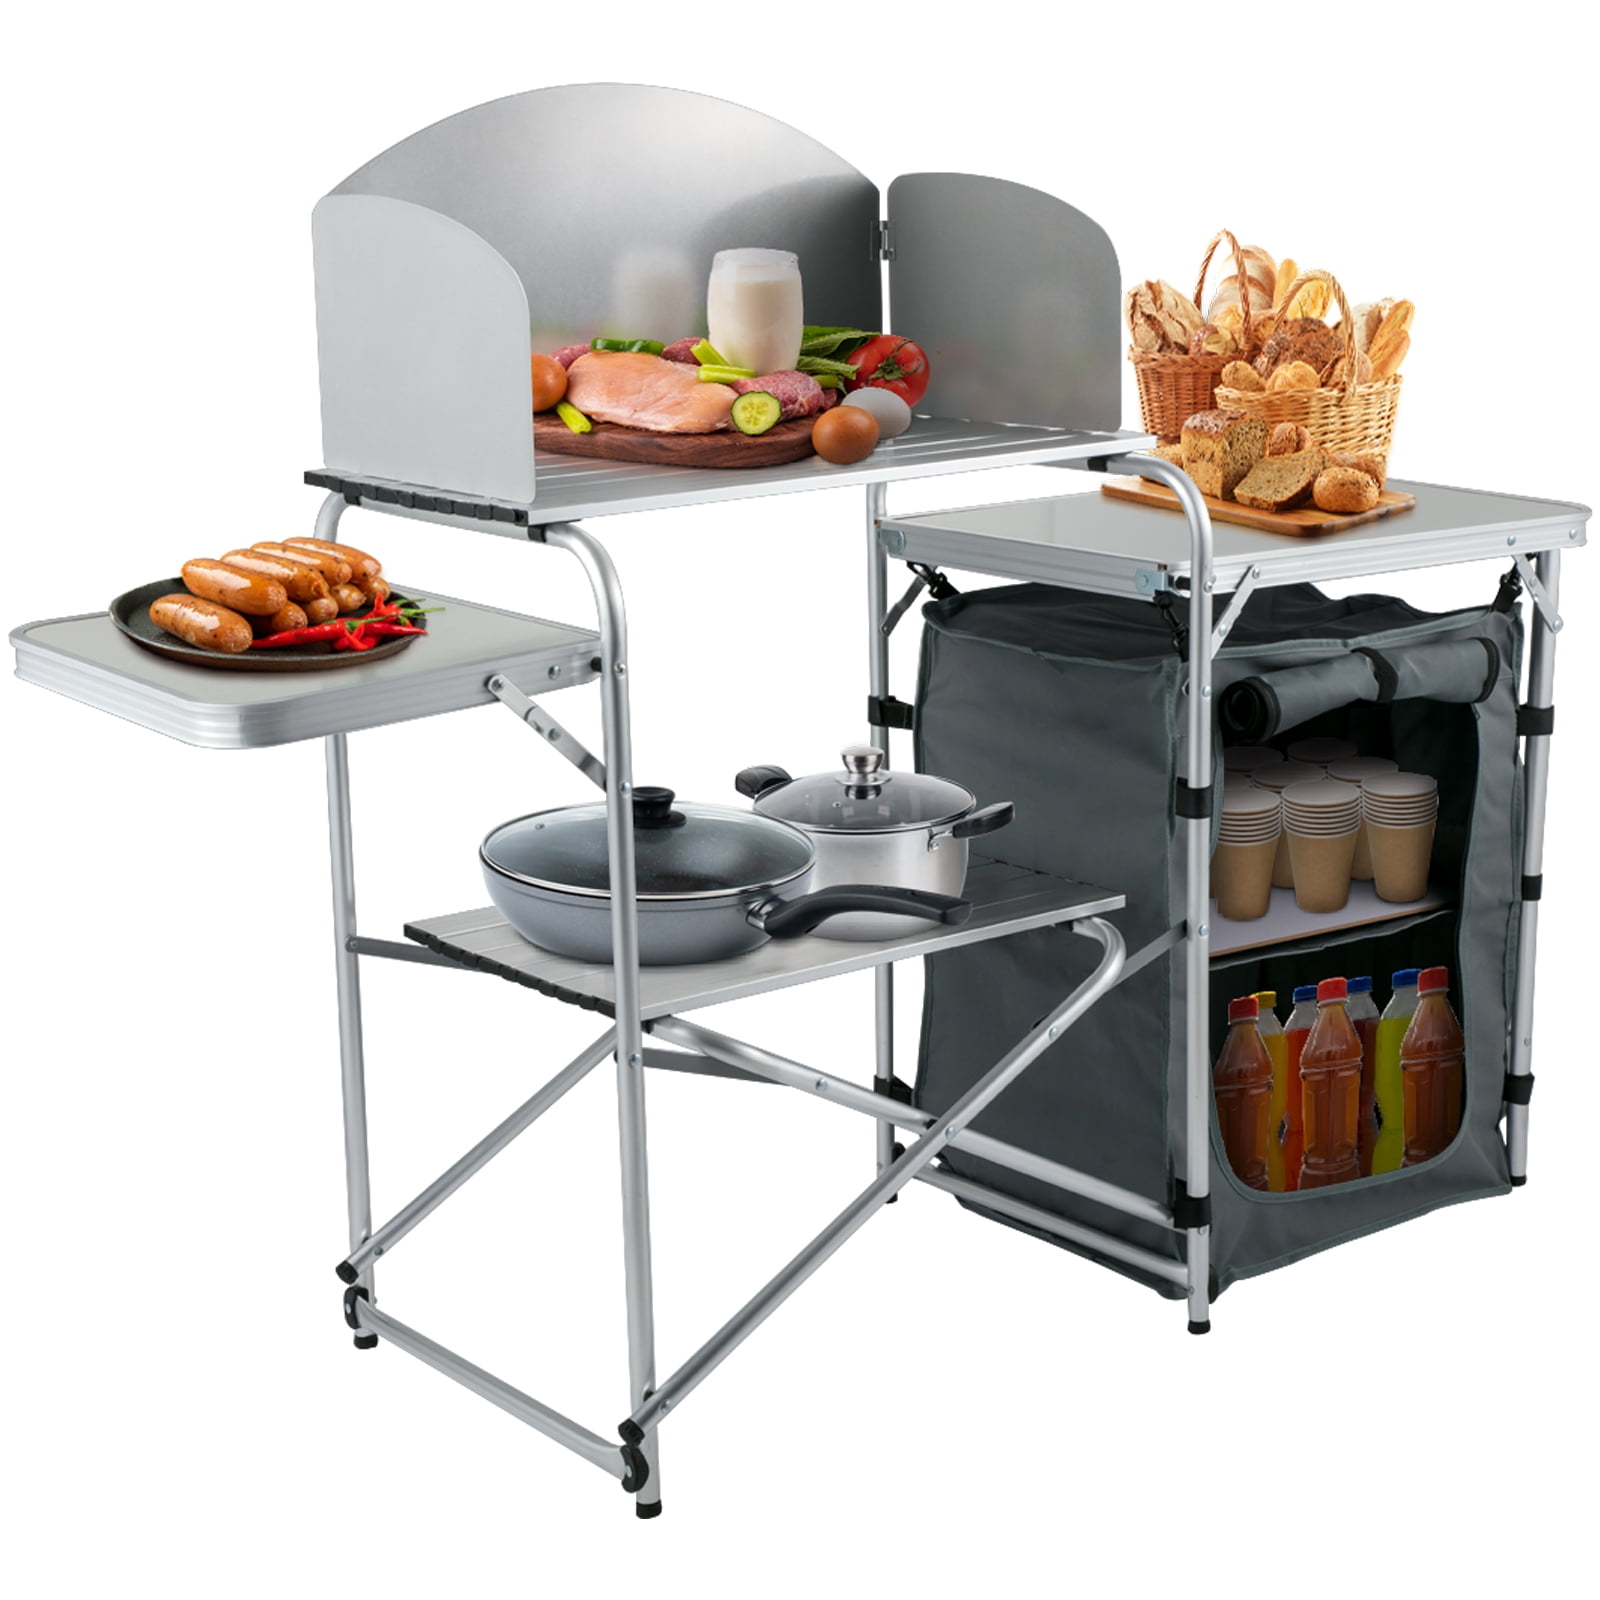 Camping Kitchen Stand Aluminium Storage Portable Cooking Windshield Outdoor New 